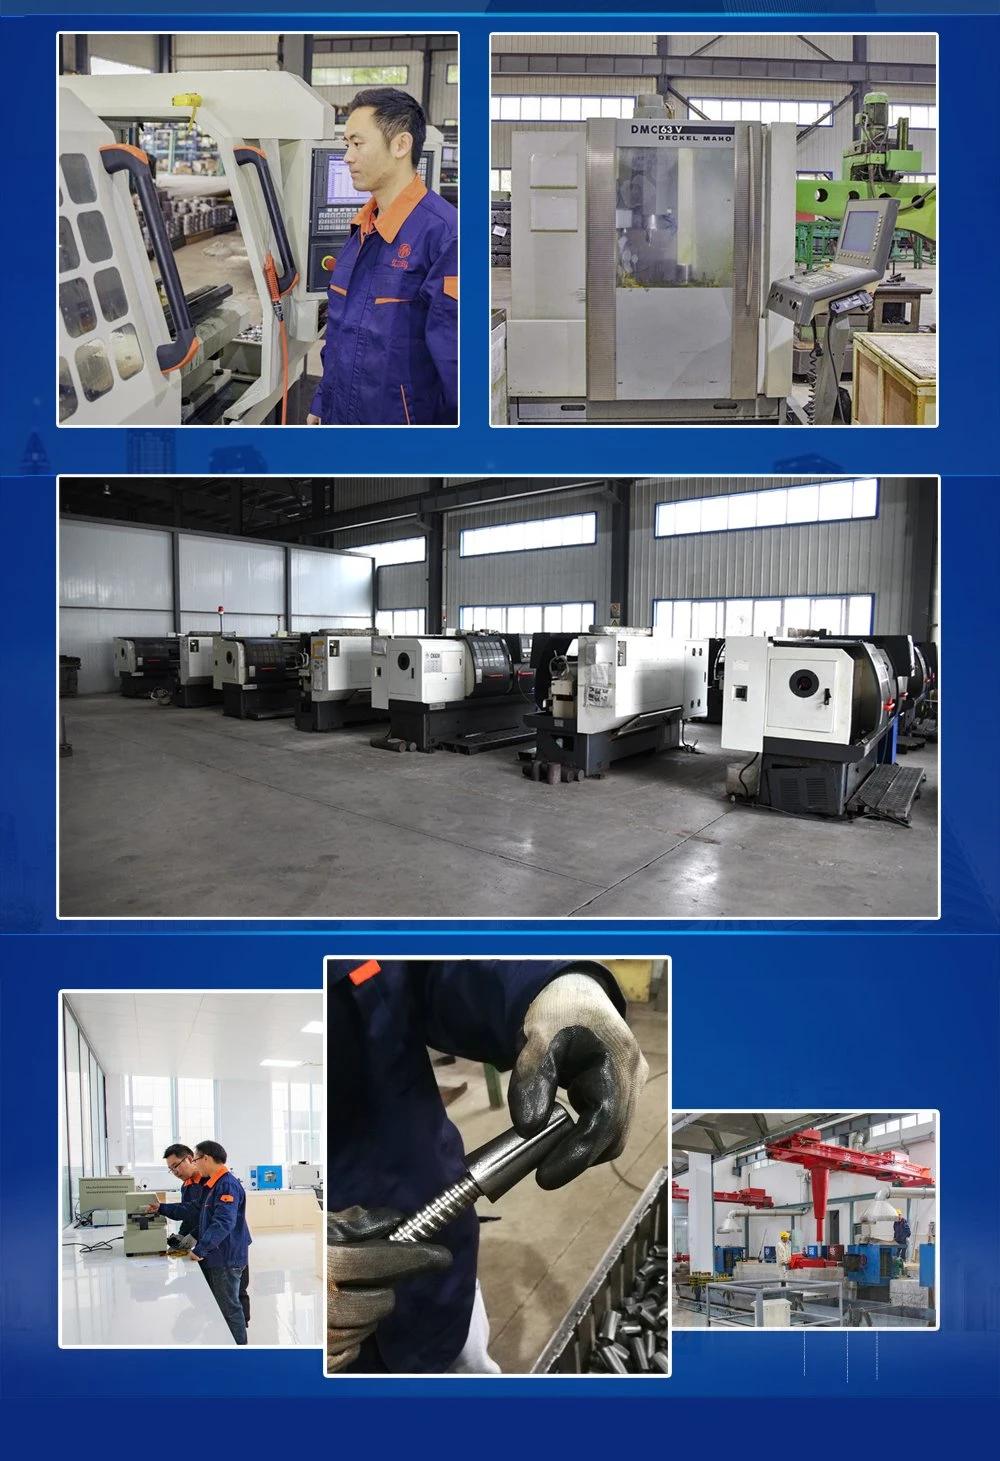 Component, Assembling, Construction, Casting, Machining, Power Fitting, Substation